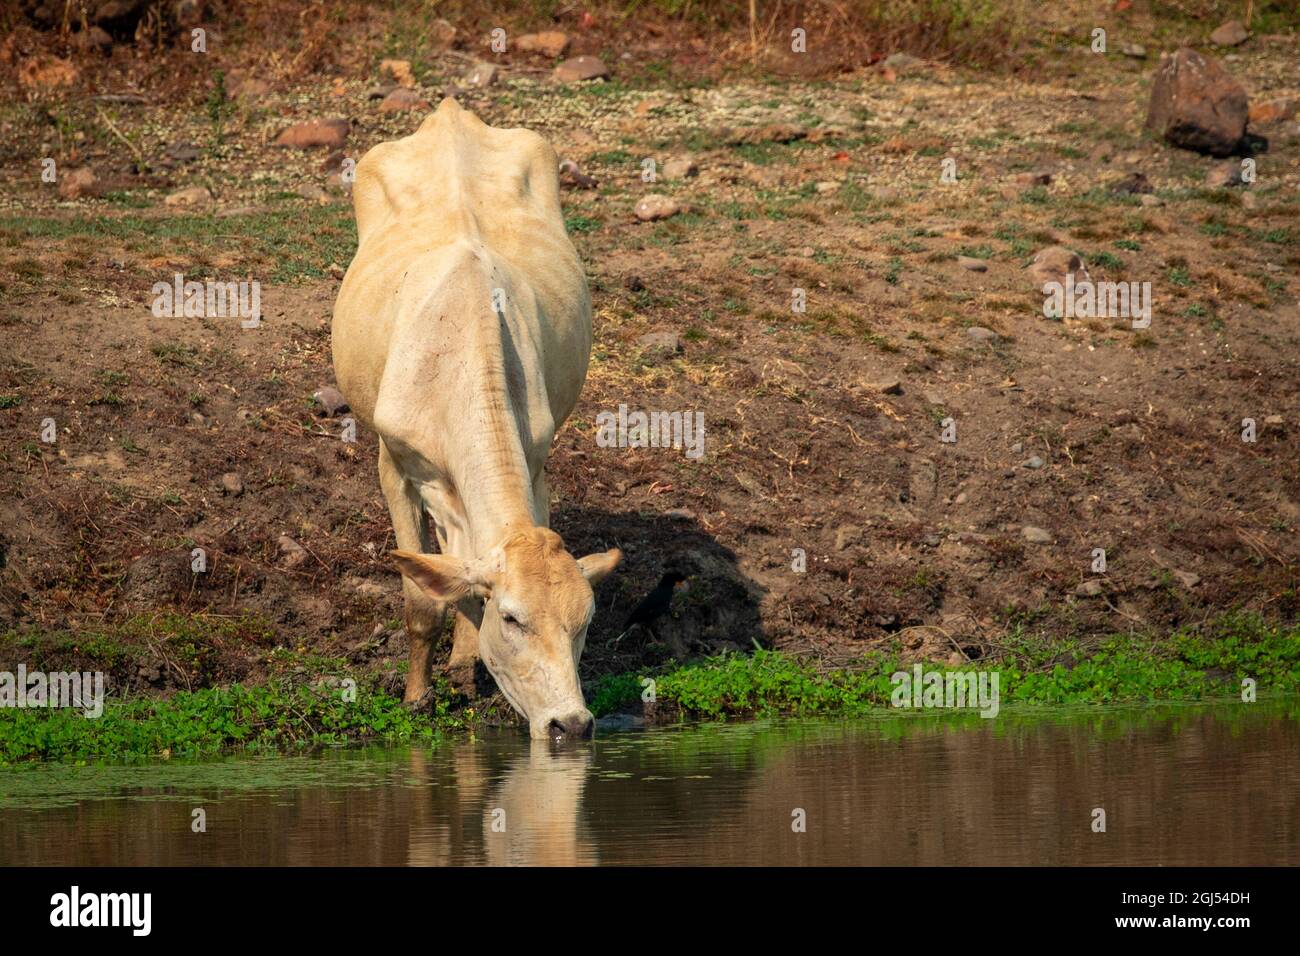 Image of cows that are drinking water in the swamp on nature background. Farm Animal. Stock Photo